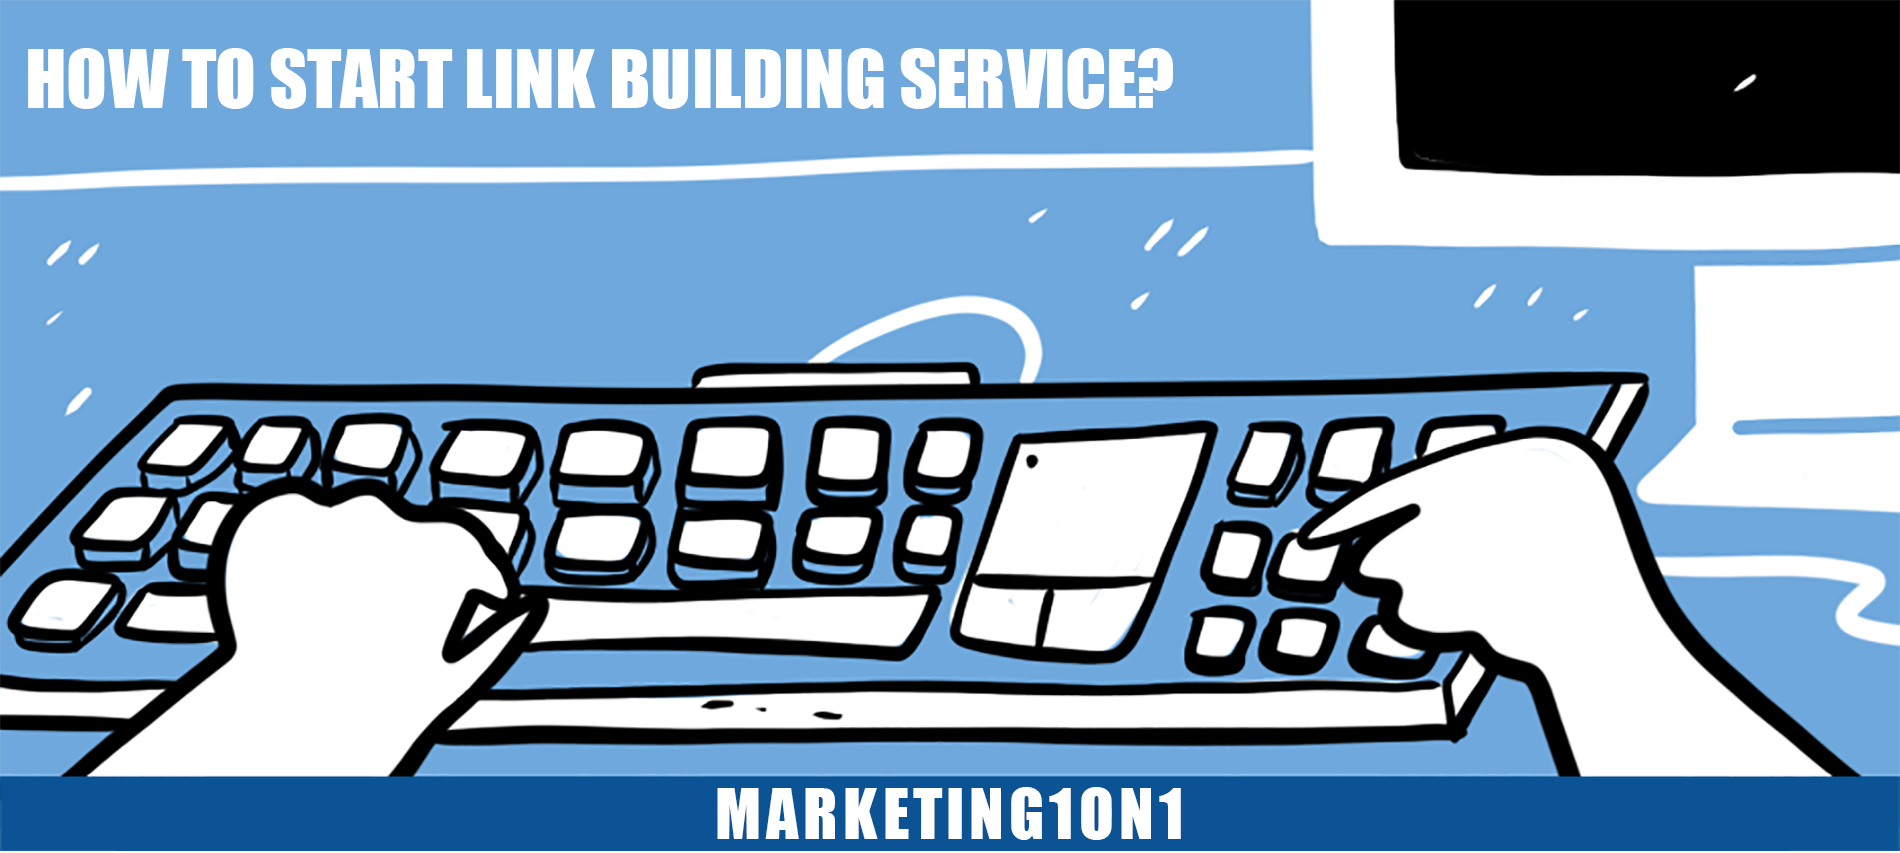 How to start link building service?